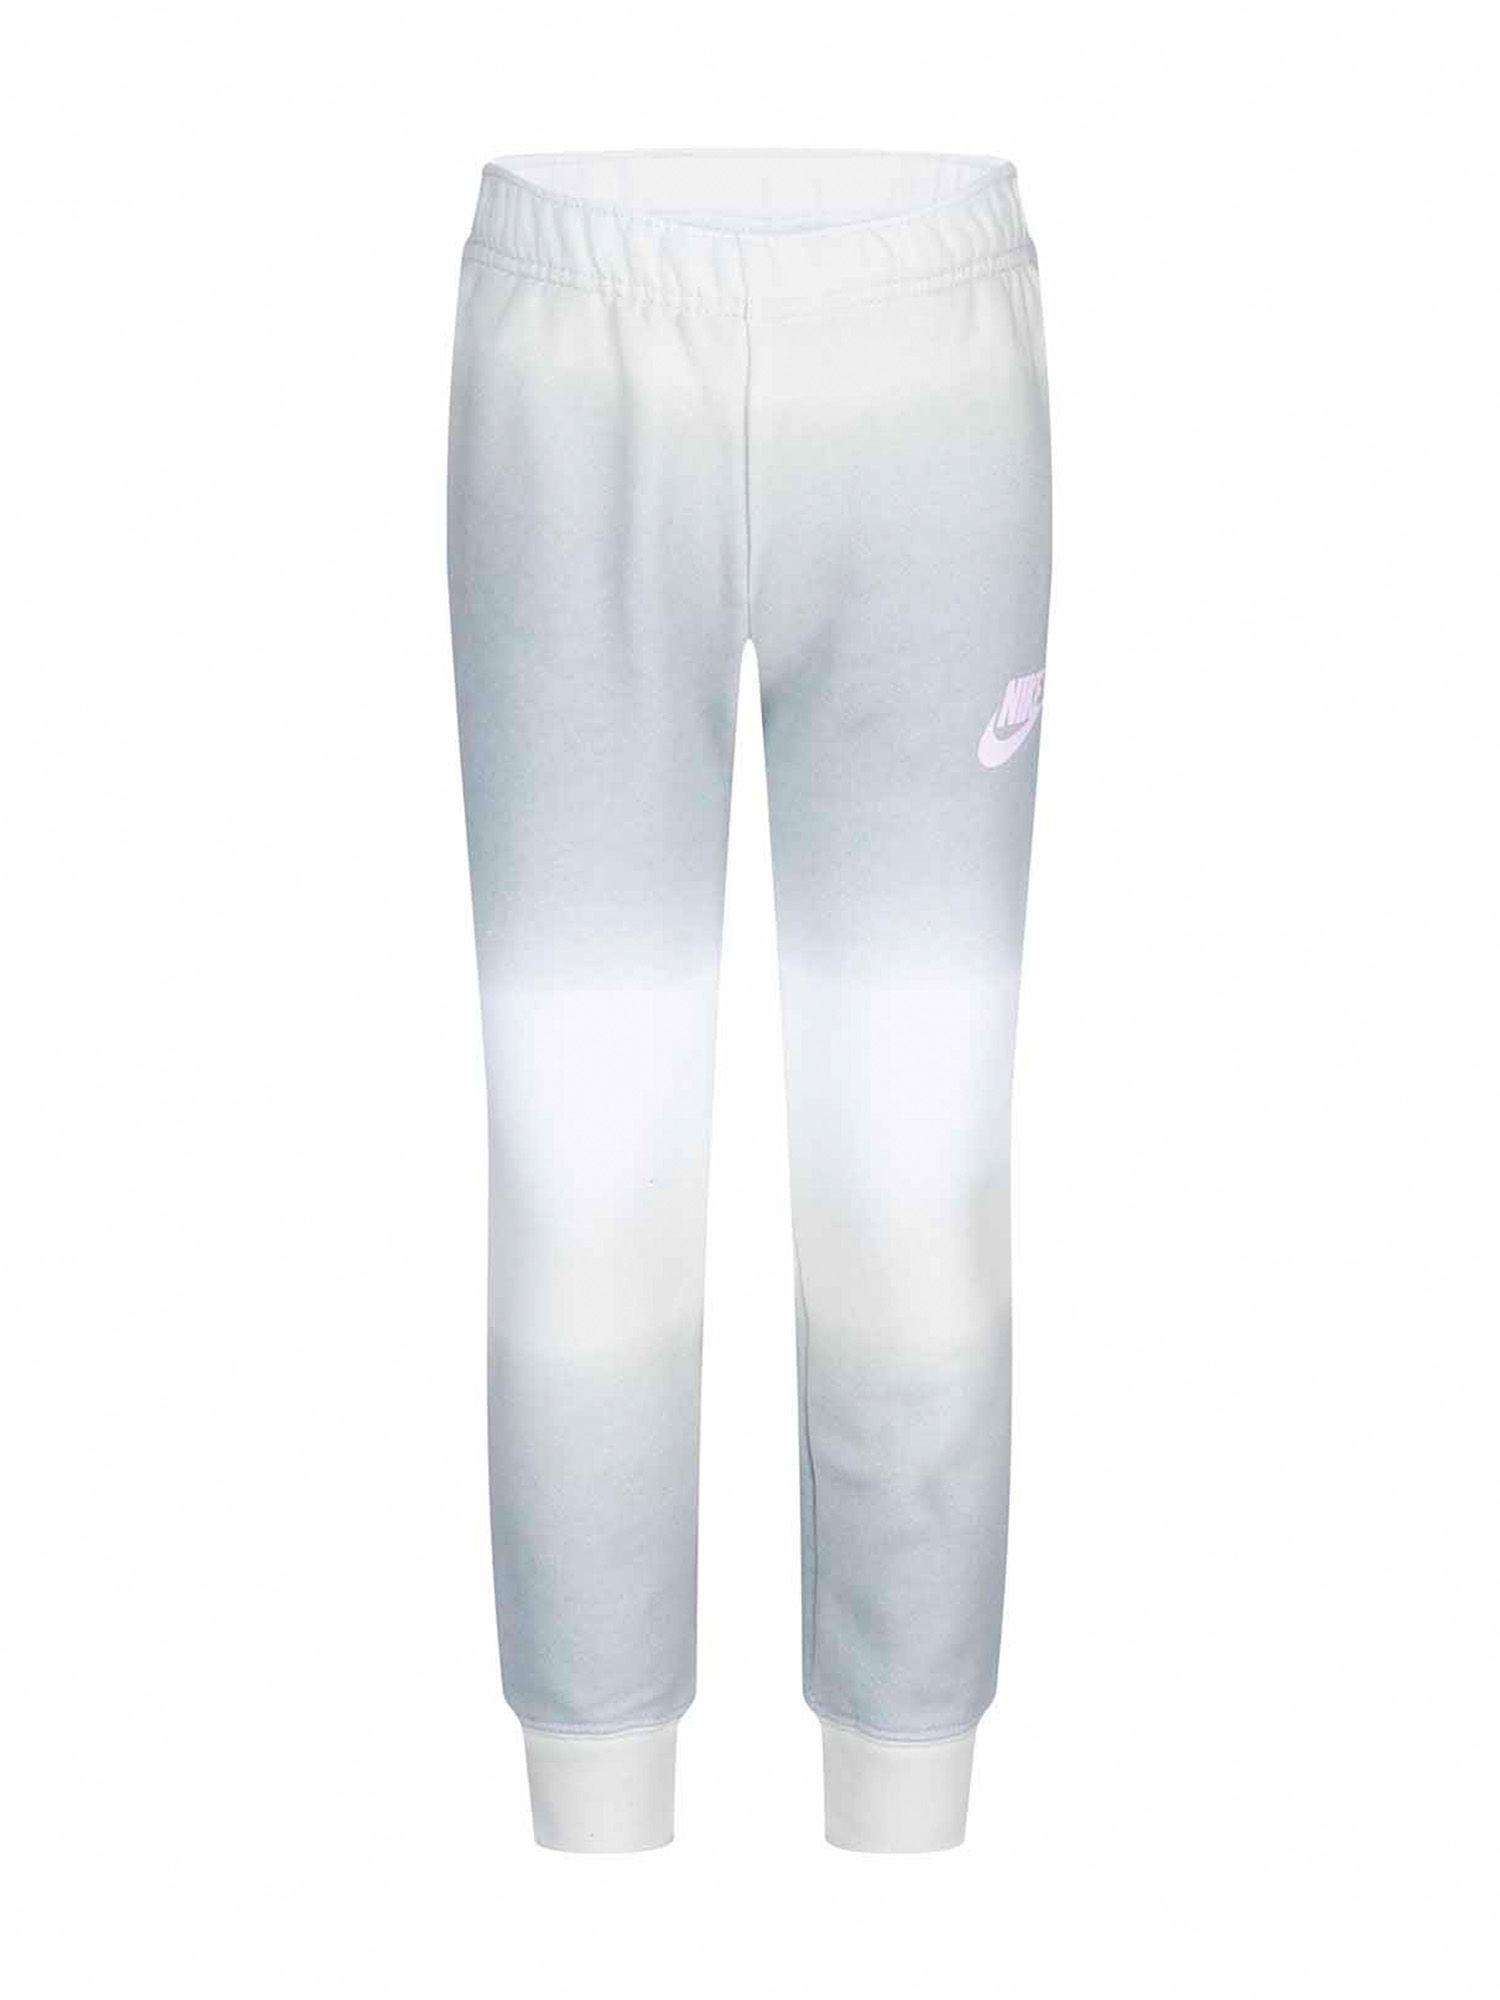 girls-grey-ombre-joggers